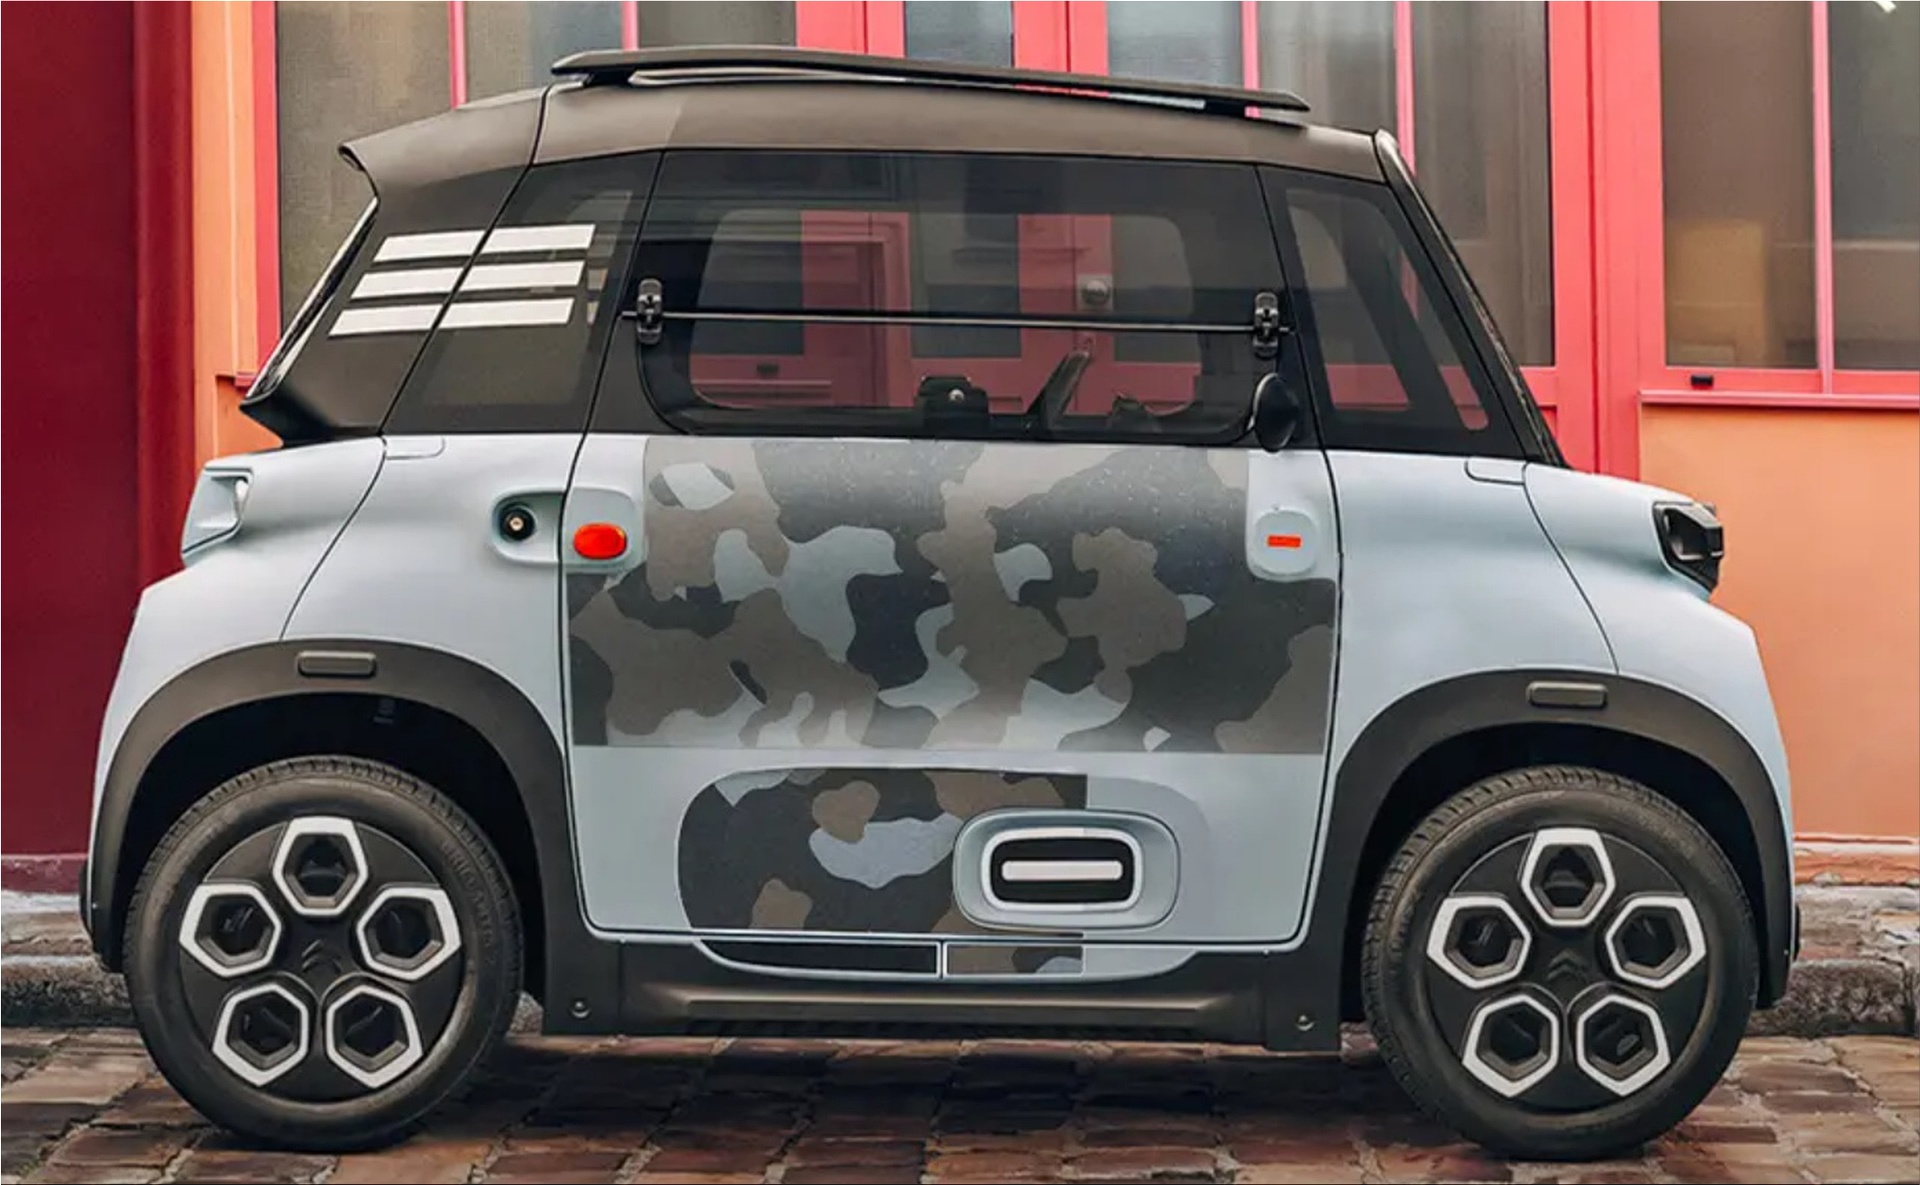 The Citroen Ami electric vehicle is the prize of a competition